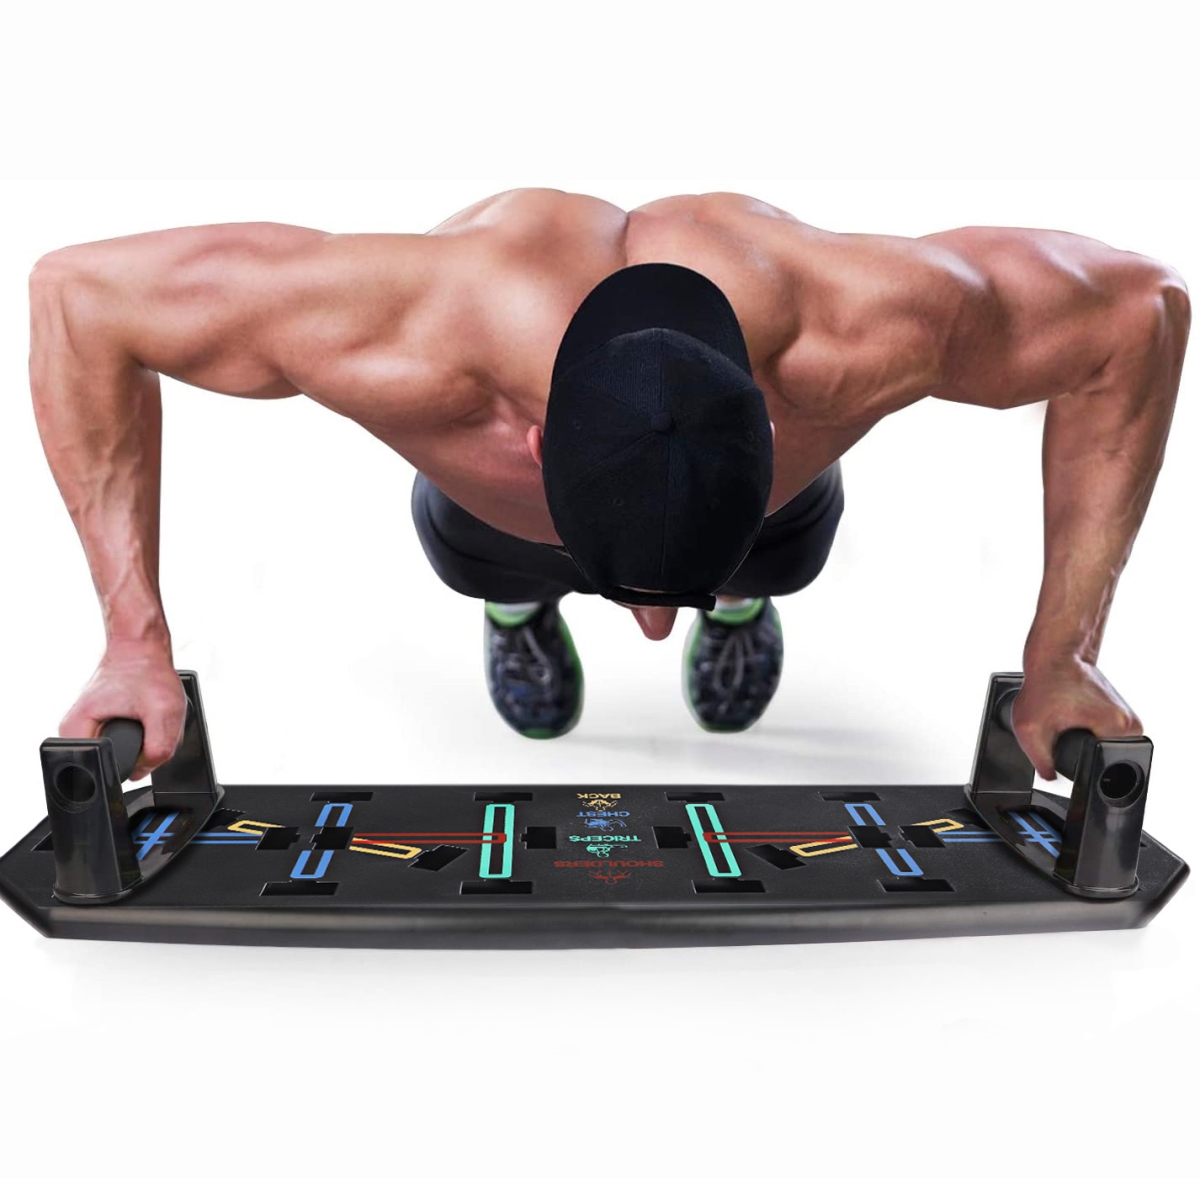 Zunammy ZWB4000-M3 Ztech 10-in-1 Push Up Rack Board Fitness System, Multi Color